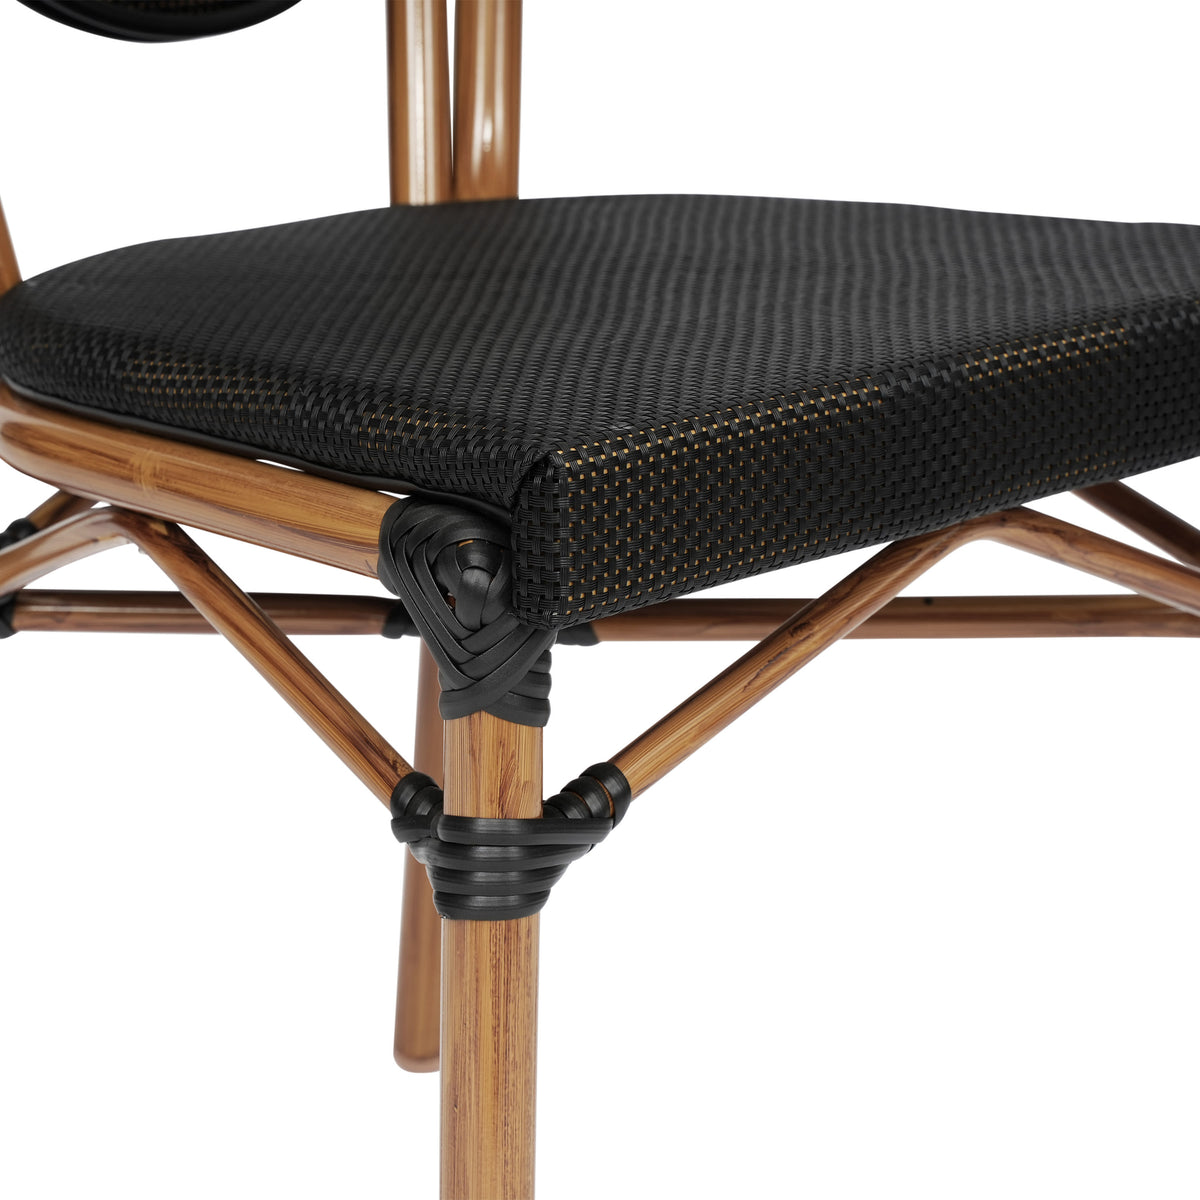 Black/Natural Frame |#| All-Weather Commercial Paris Chair with Natural Metal Frame-Black